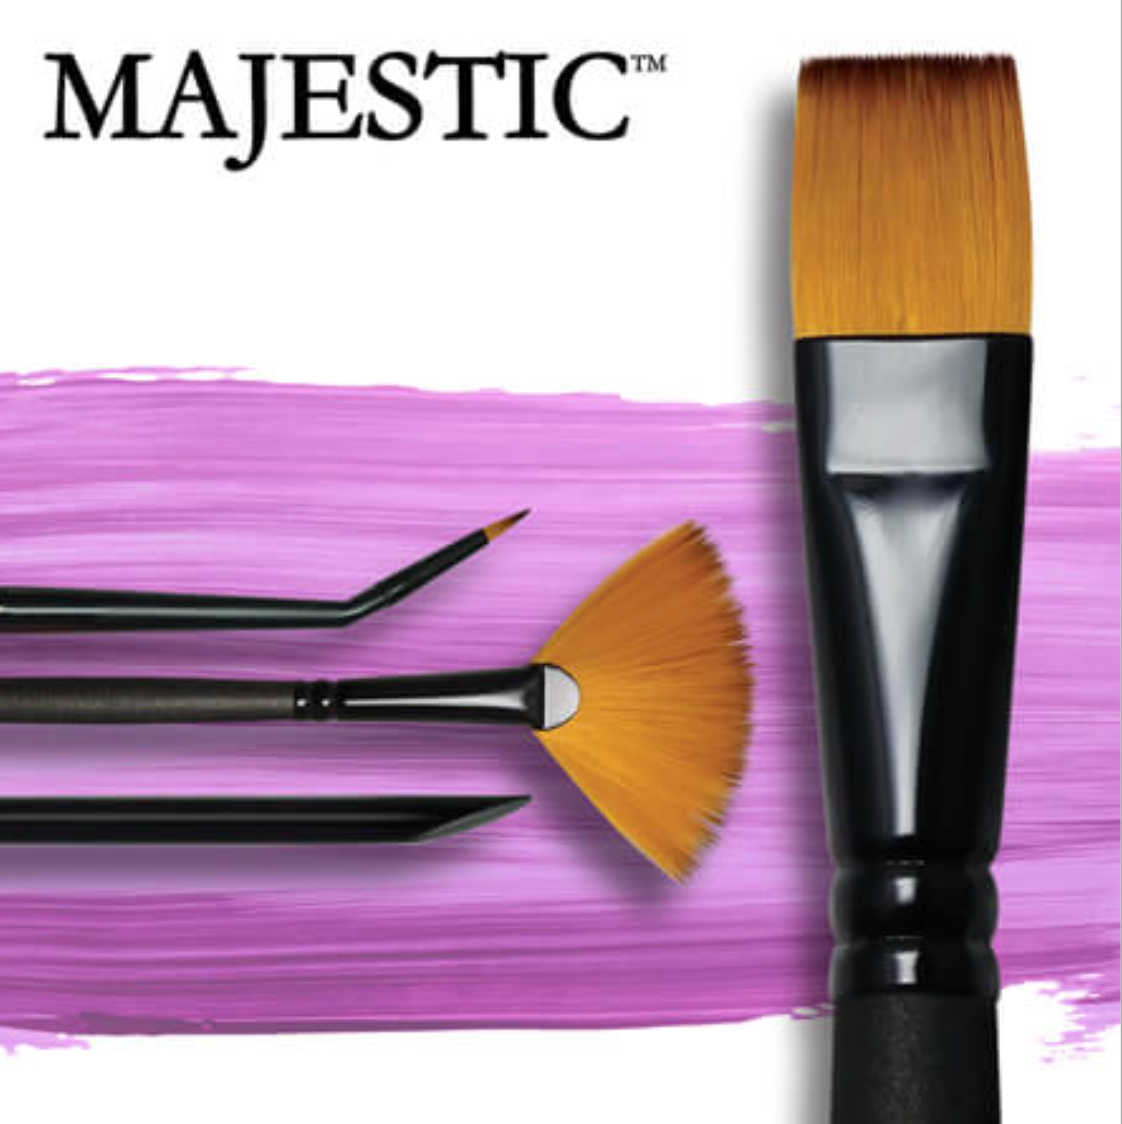 Royal and Langnickel Mini Majestic miniature brush for all media. Available for sale in Singapore.